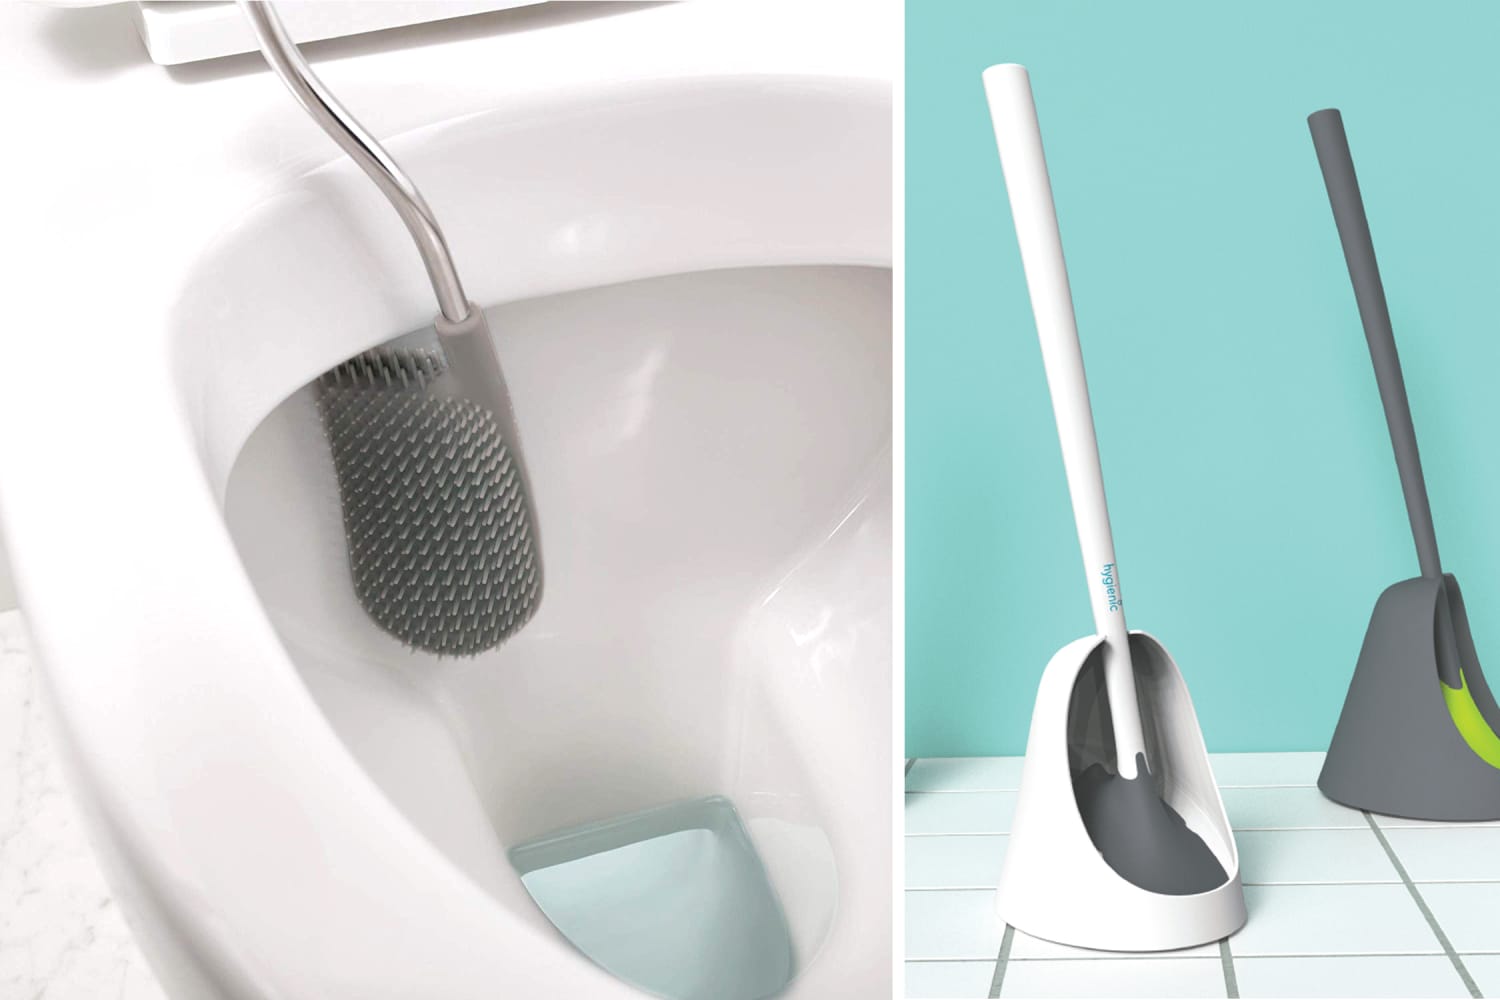 https://cdn.apartmenttherapy.info/image/upload/f_auto,q_auto:eco,c_fill,g_auto,w_1500,ar_3:2/at%2Fliving%2Fsilicone-toilet-brushes-2